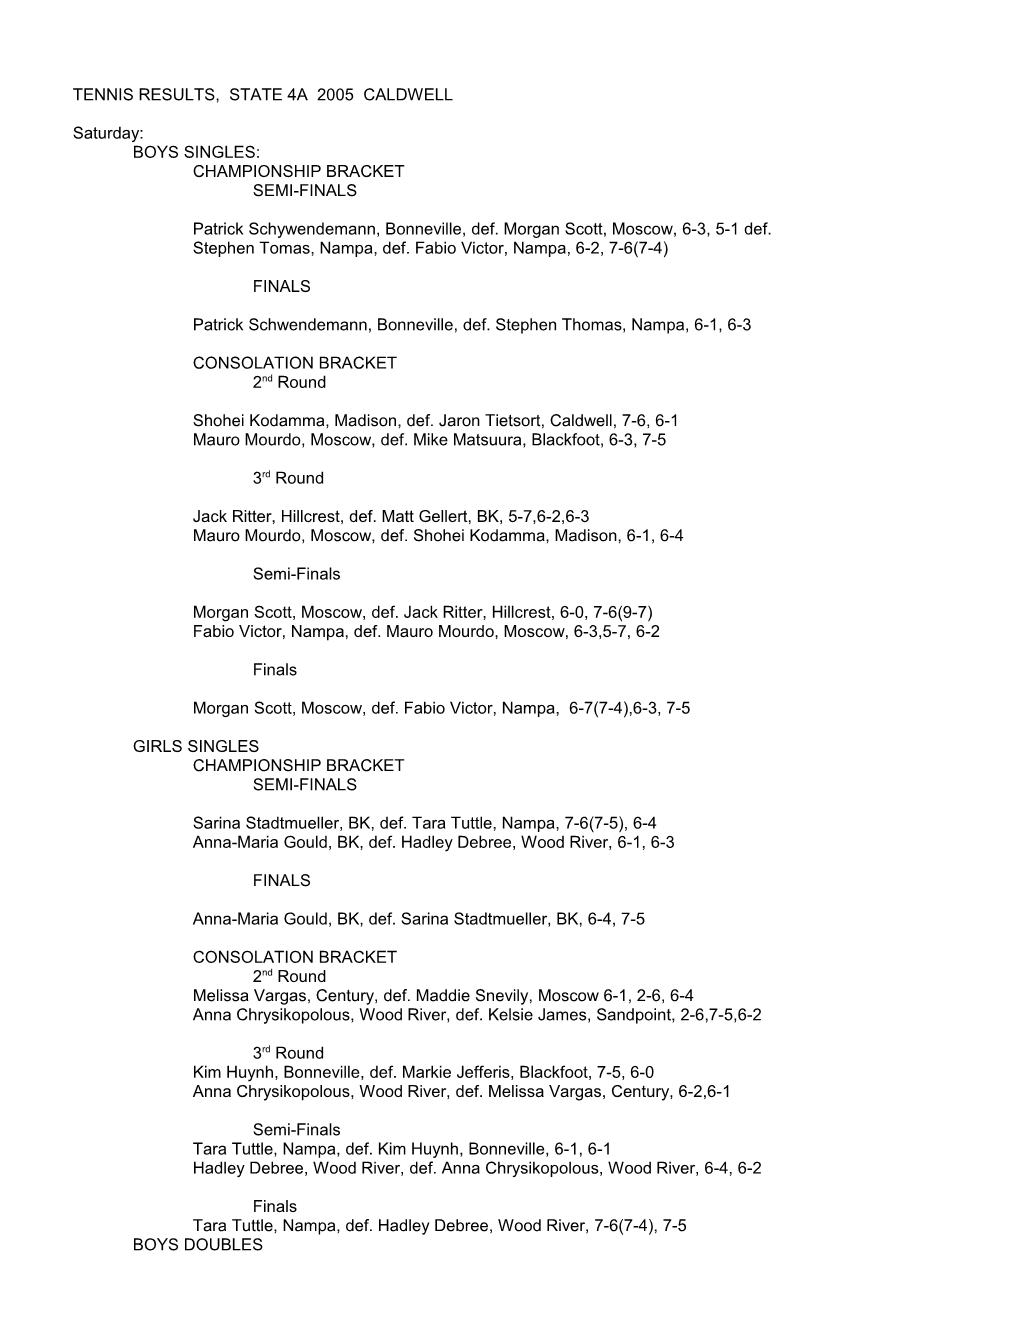 Tennis Results, State 4A 2005 Caldwell